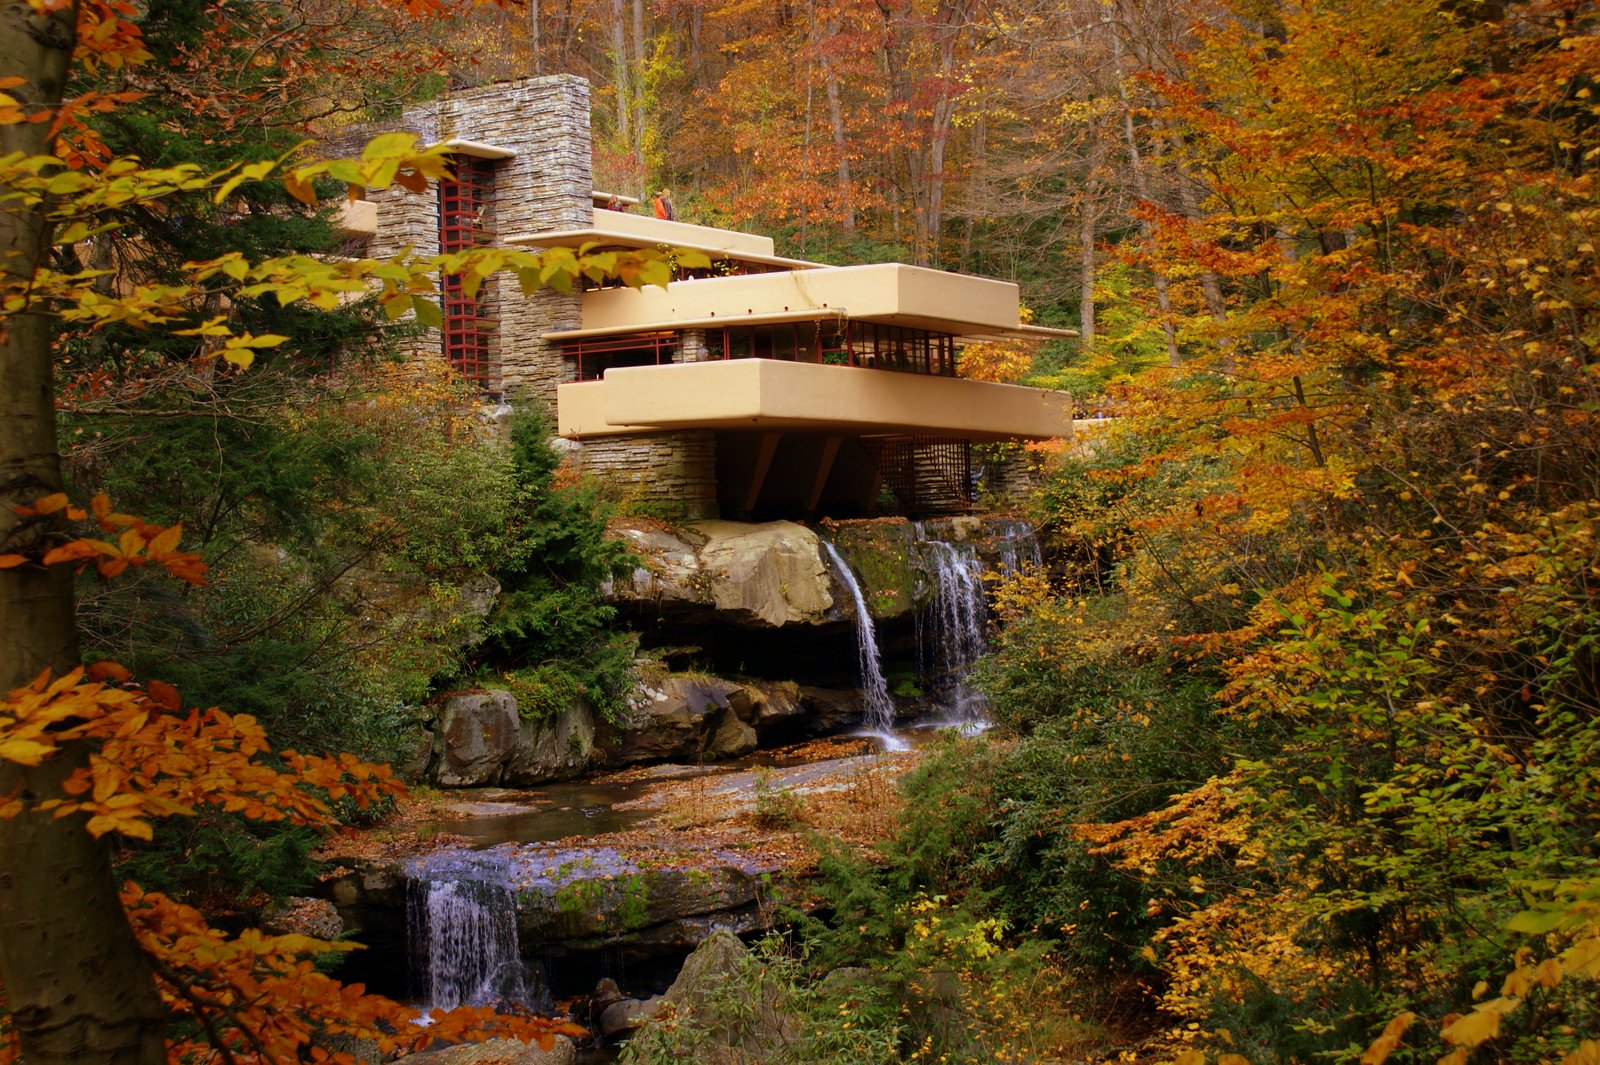 Sights Unseen Photography: Falling Water in the Fall